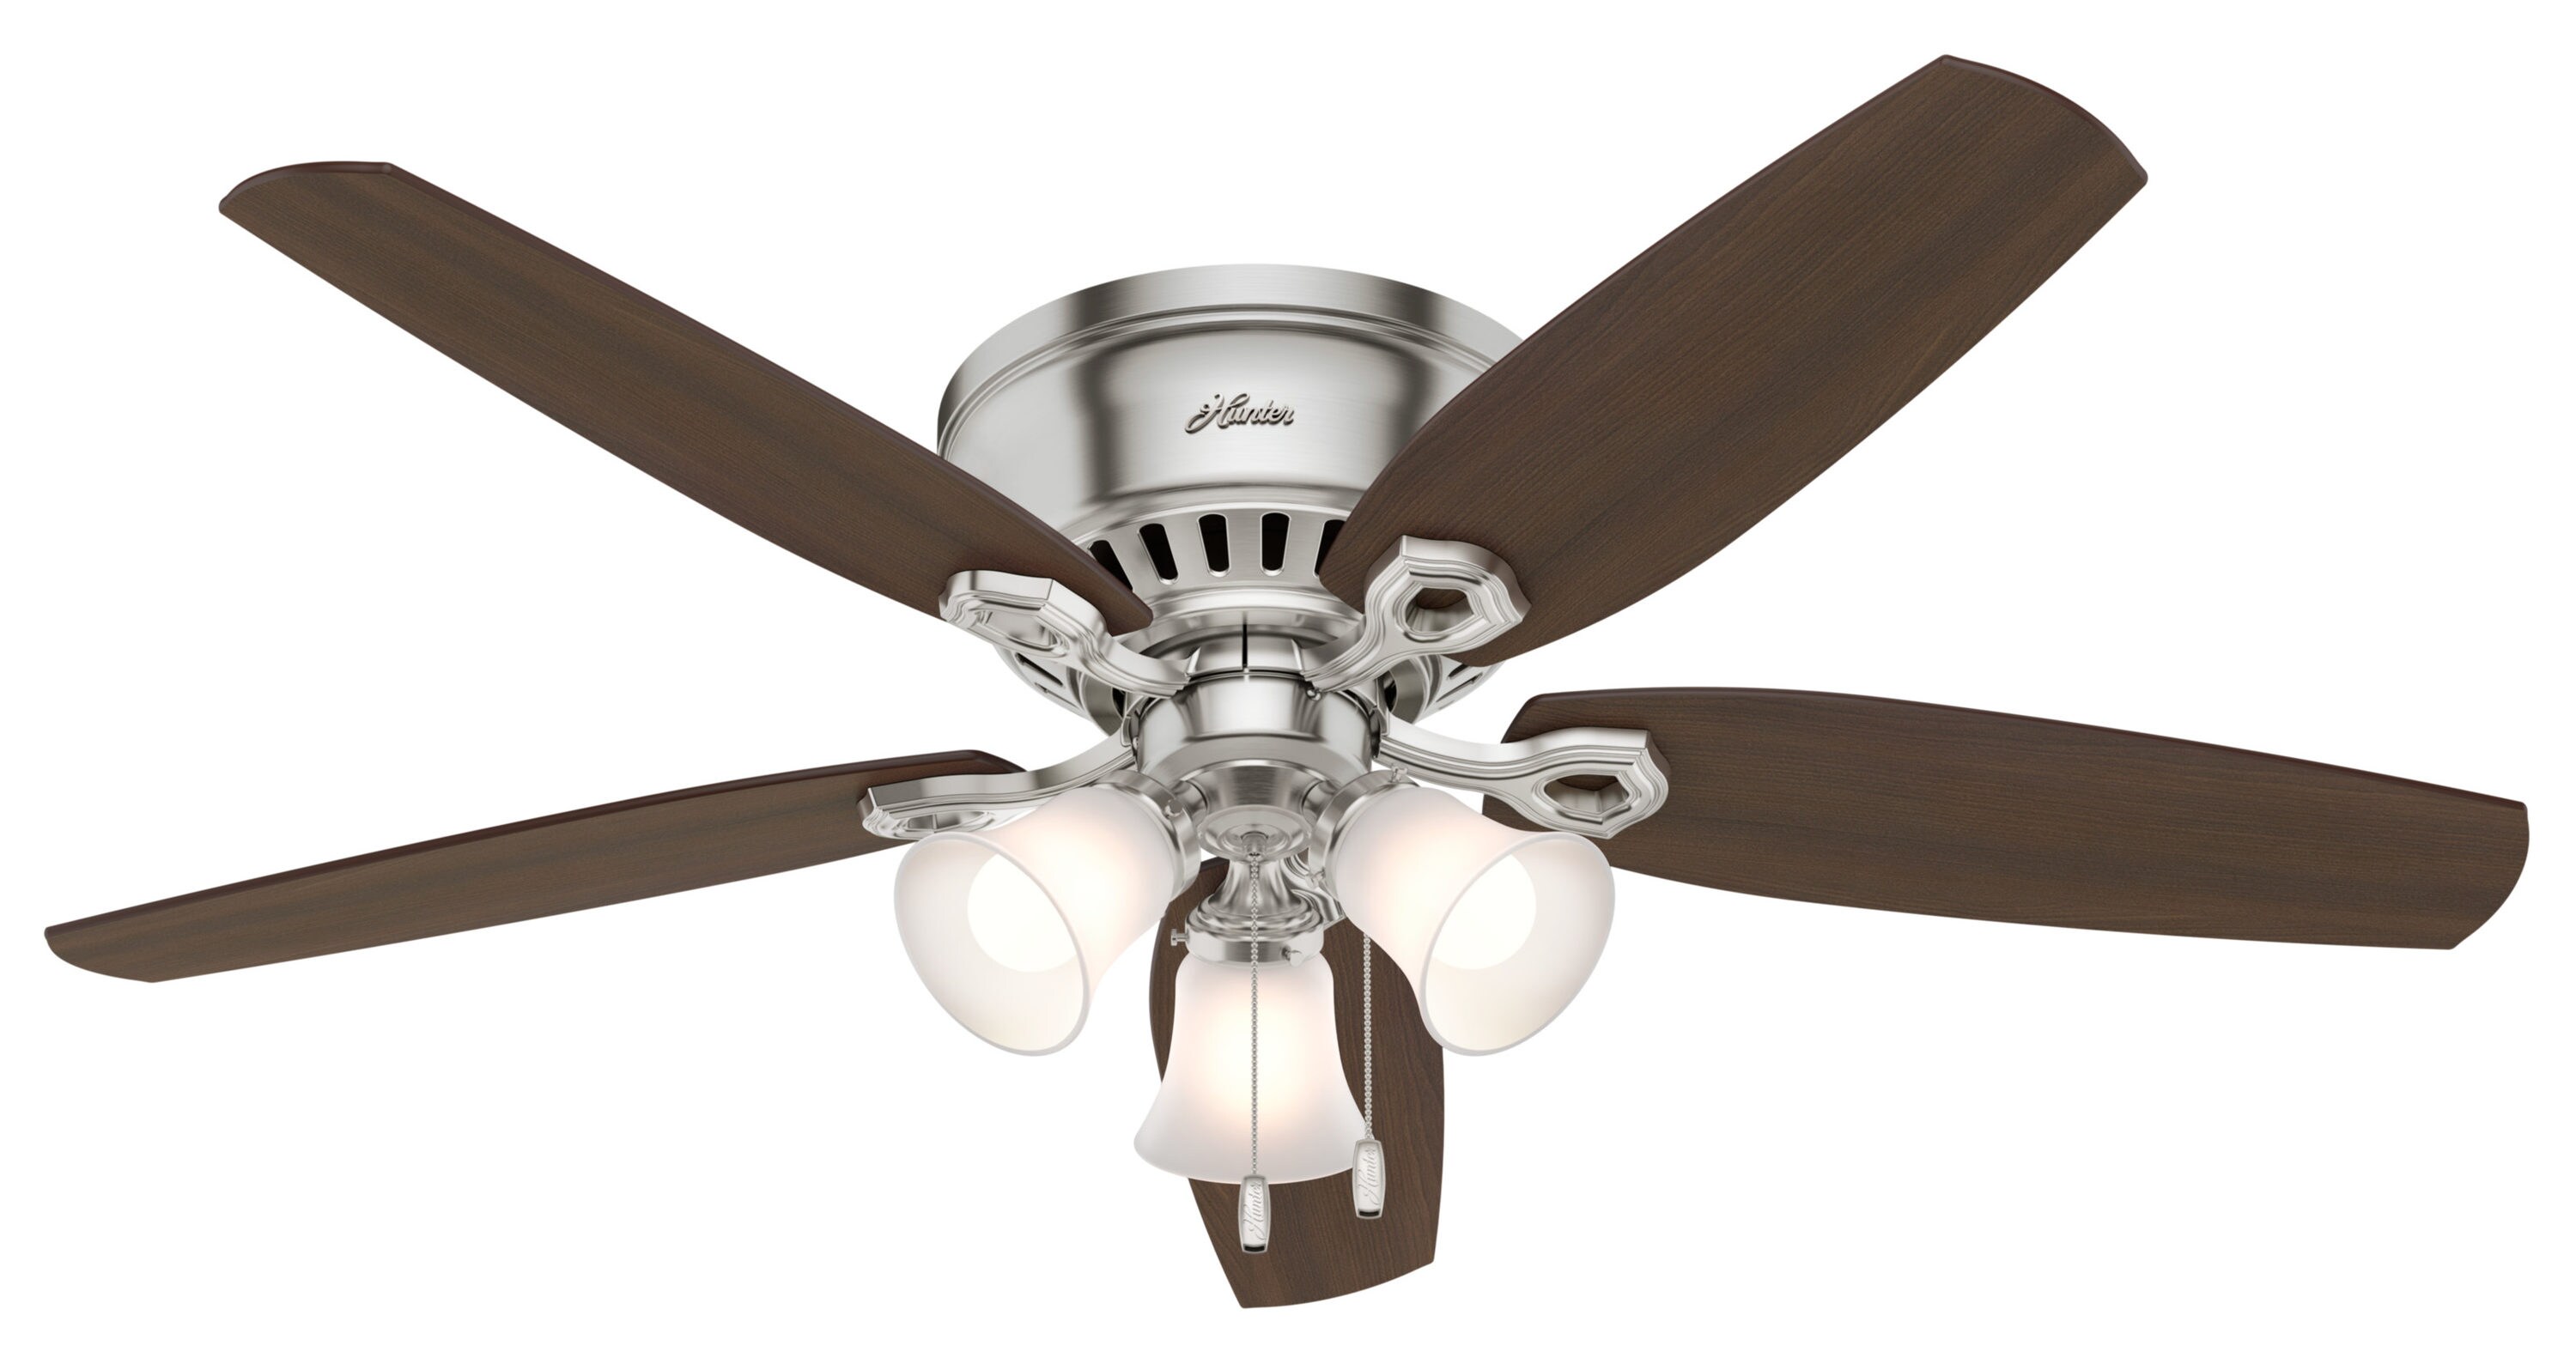 Brushed Nickel Hunter 53001 Fremont 52-Inch Low Profile Ceiling Fan with Light 